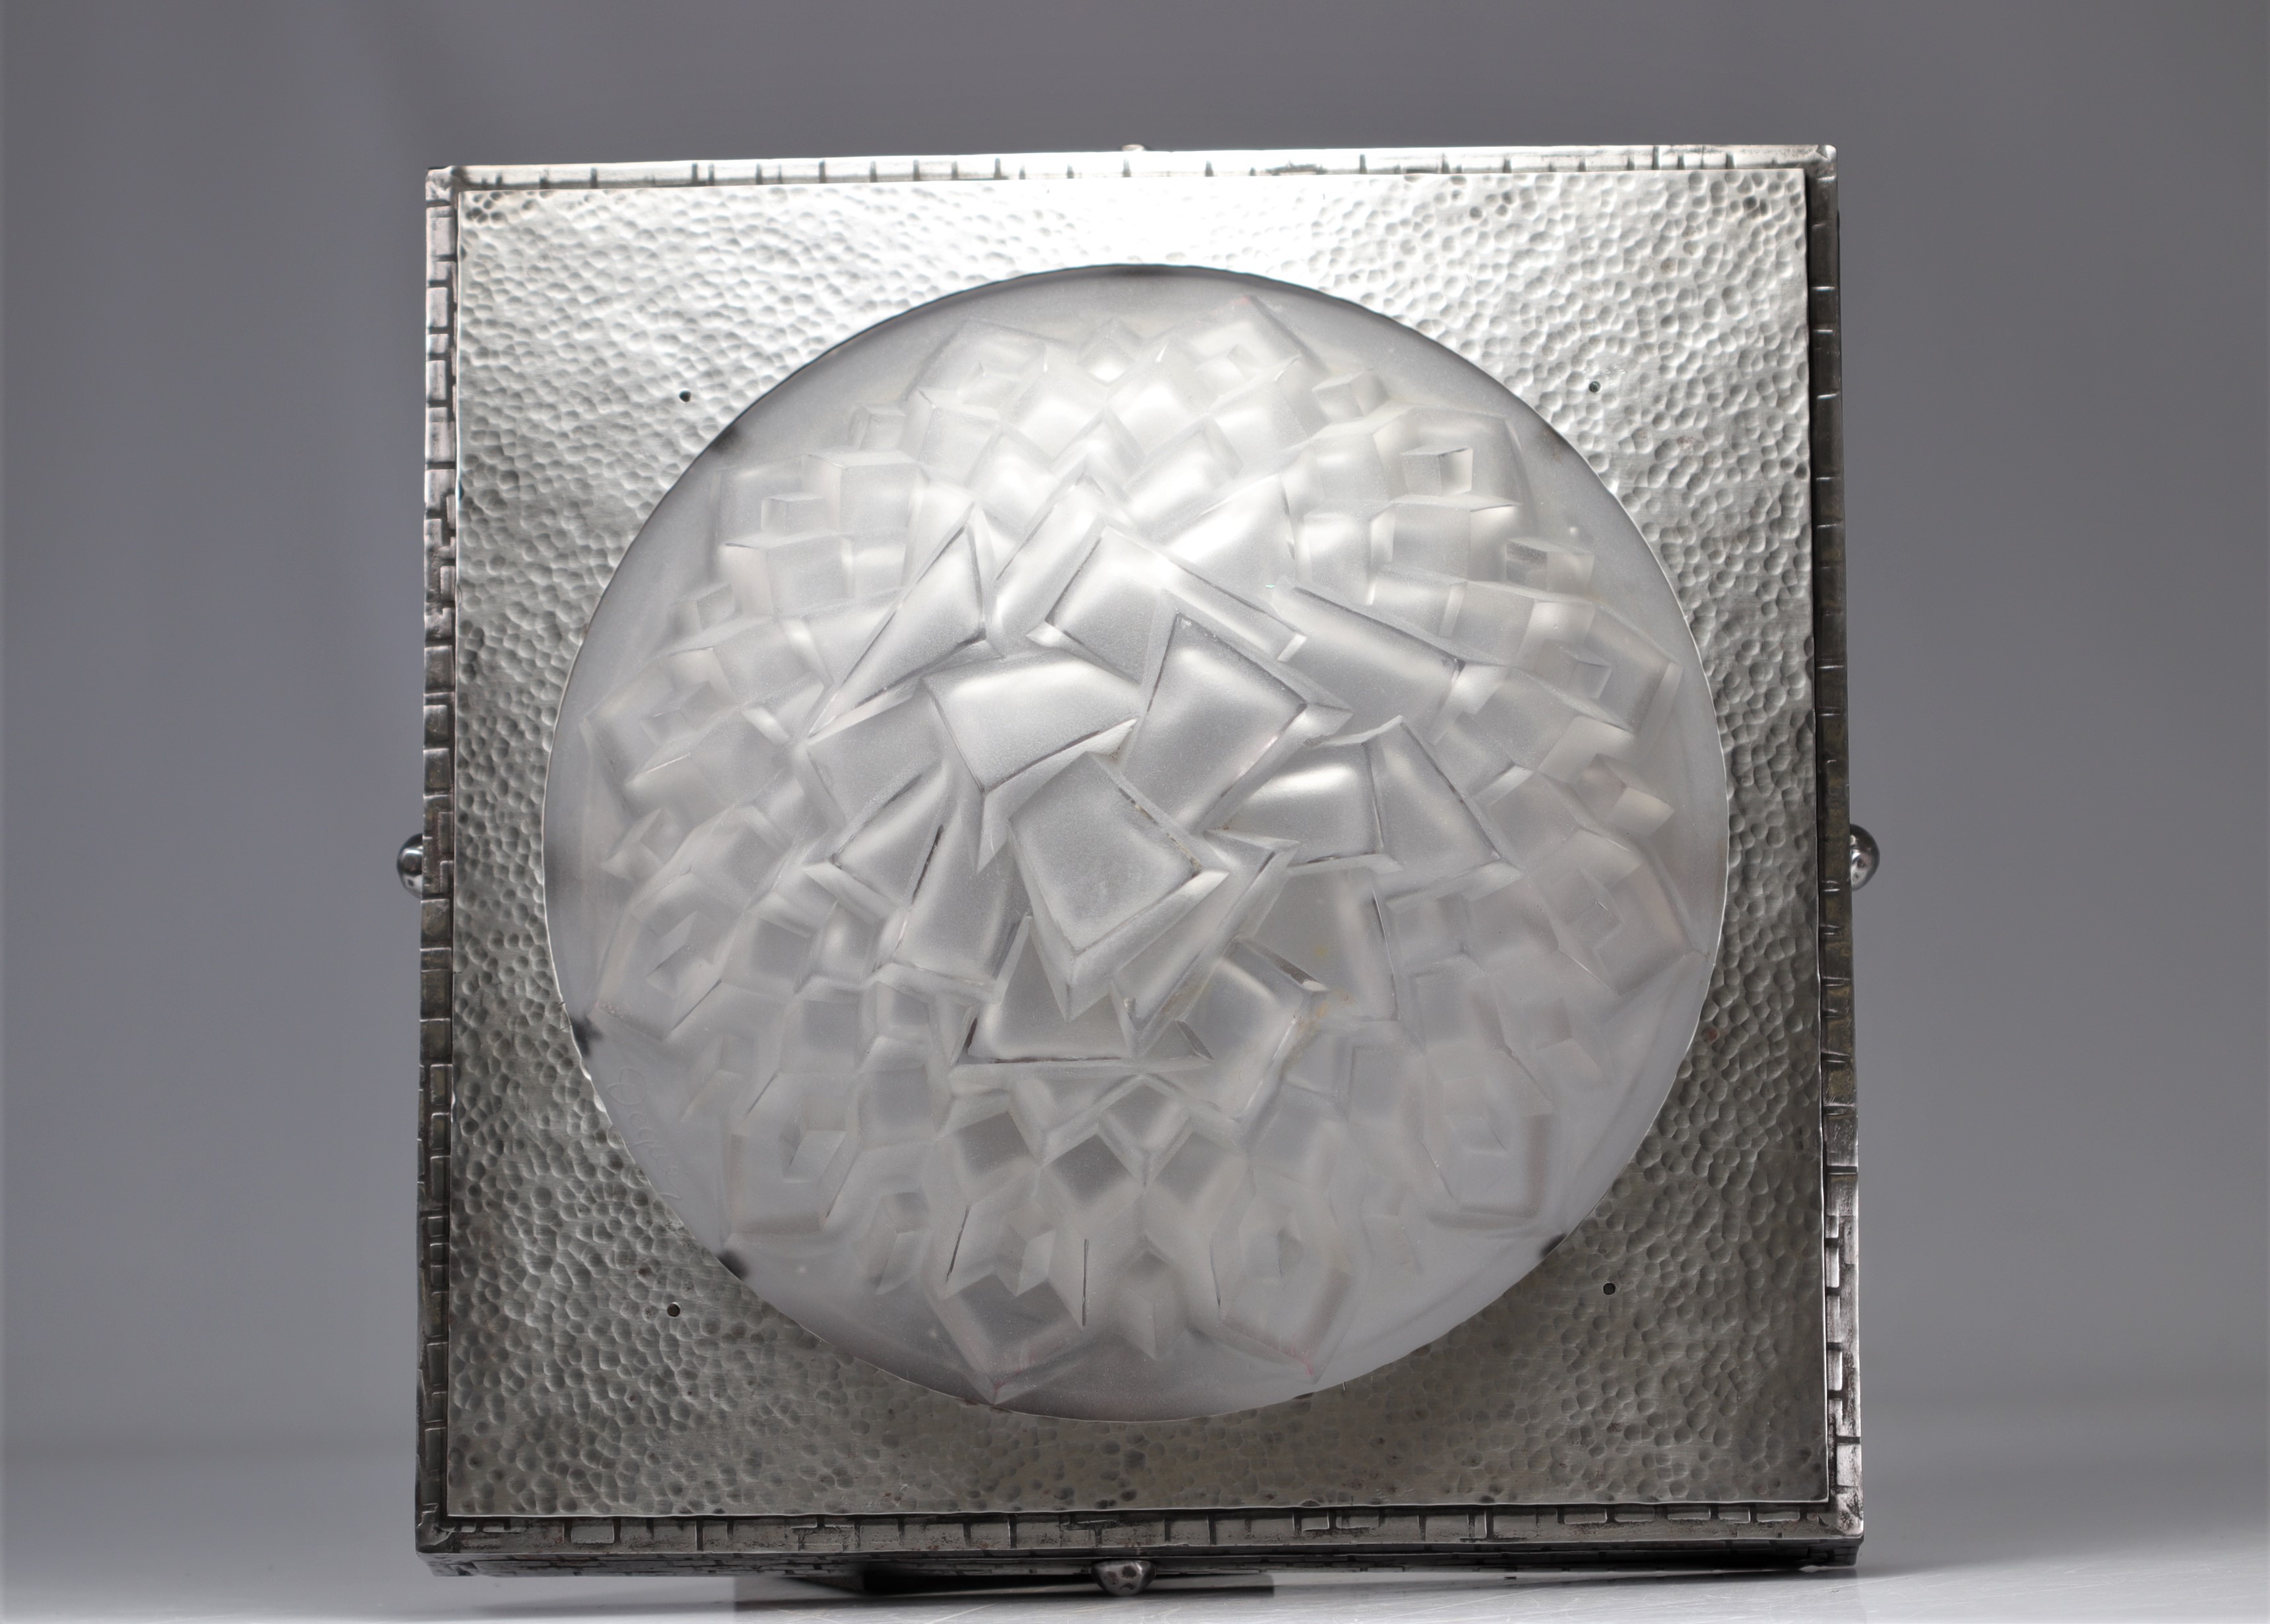 Art Deco ceiling light in stylized metal with geometric glass dome and 4 points of light - signed De - Image 2 of 4